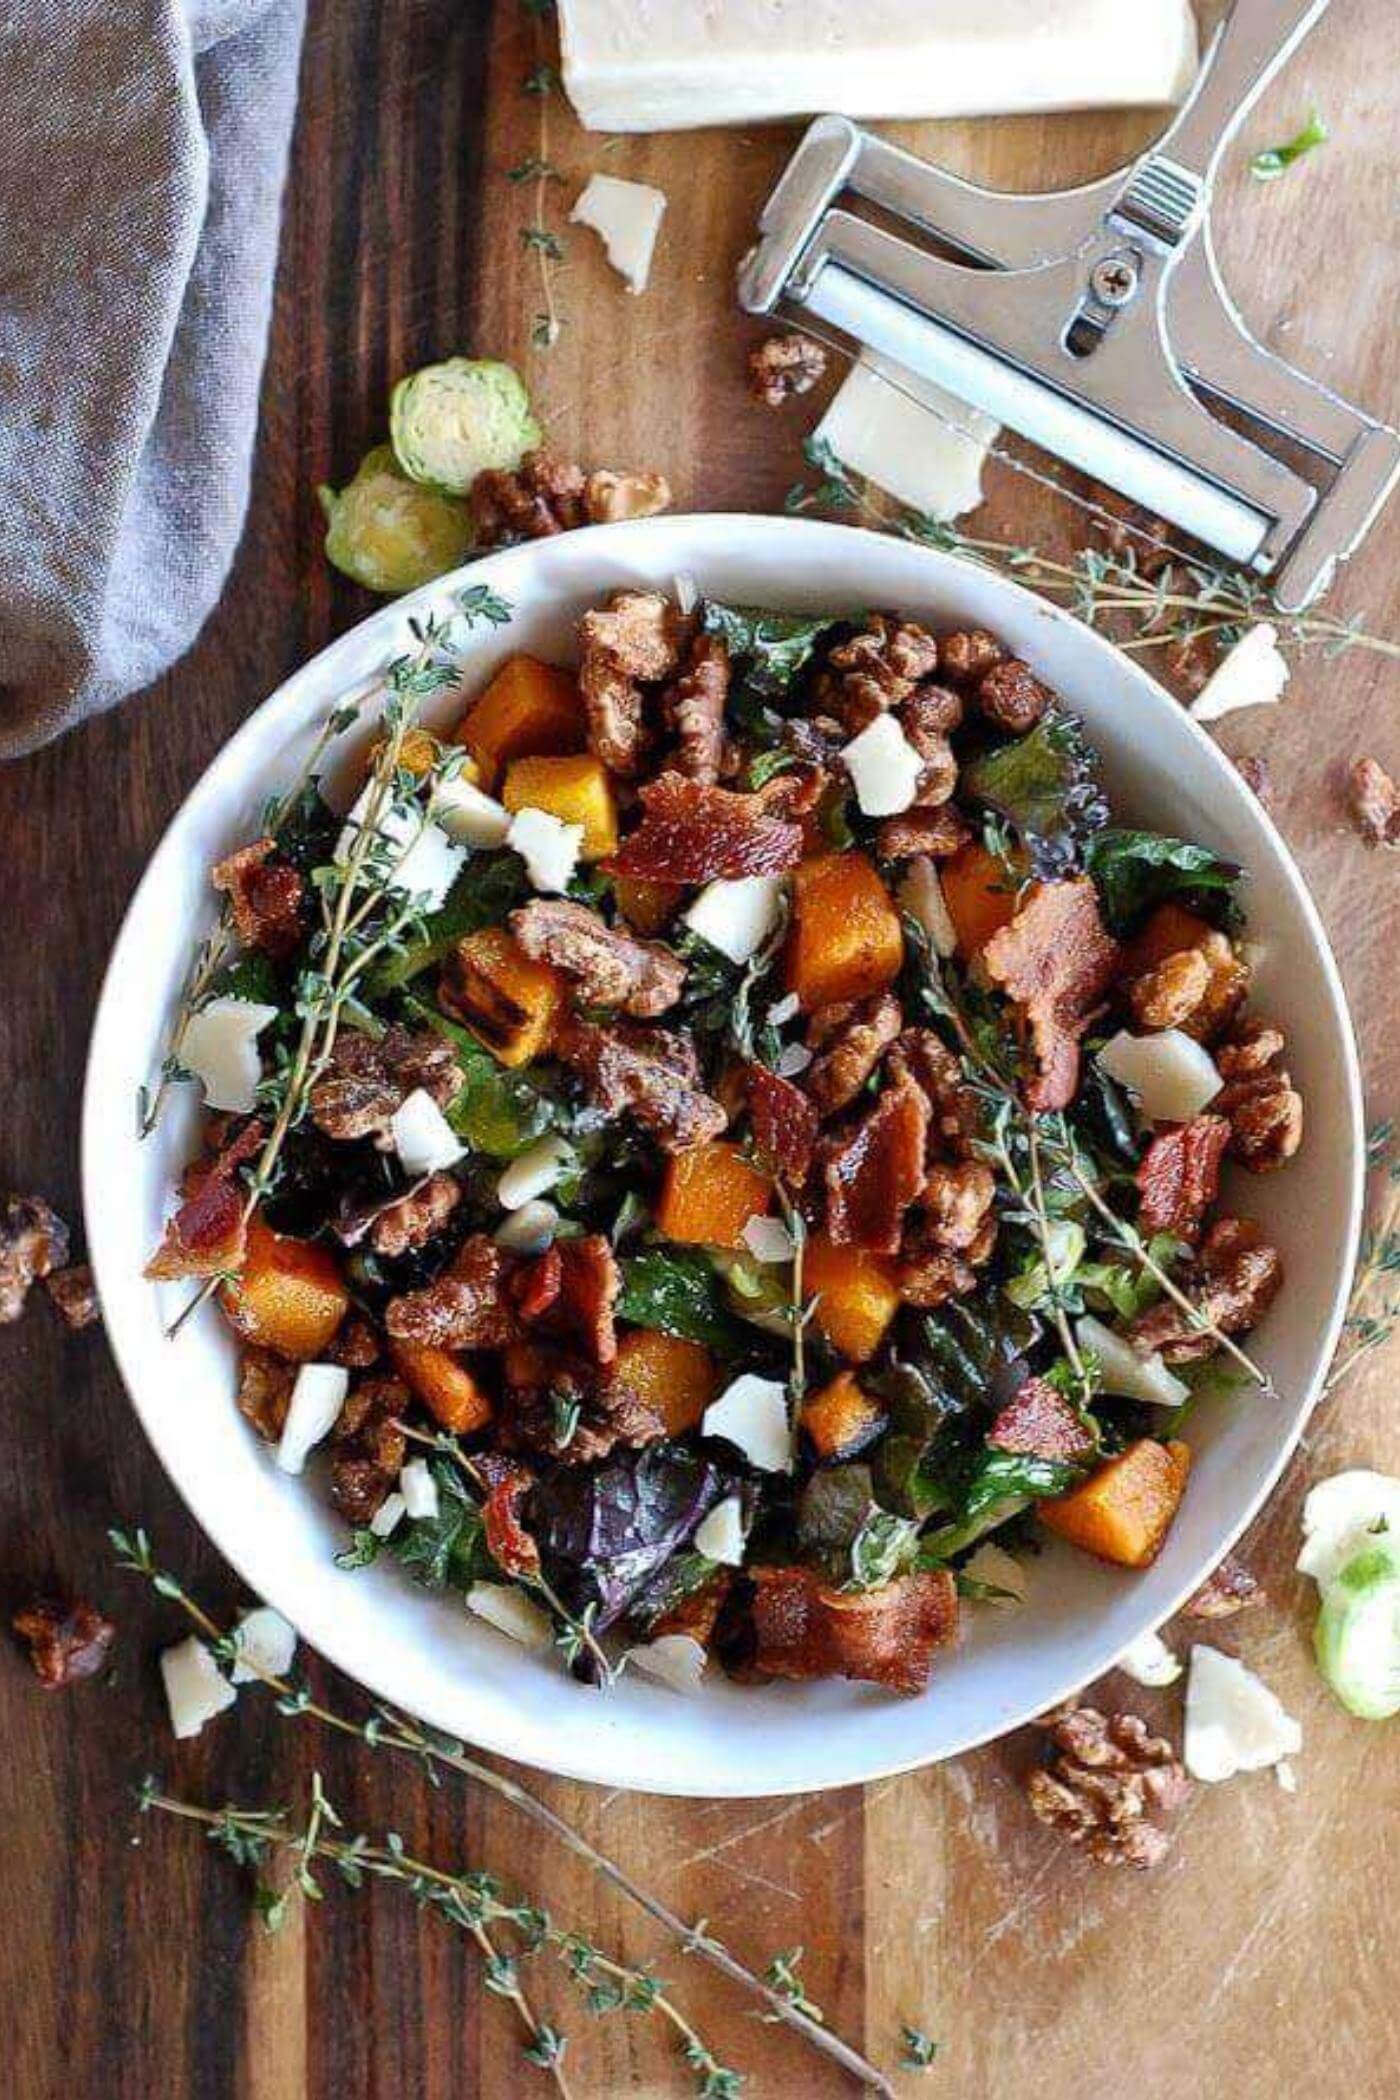 kale salad with brussels sprouts, roasted butternut squash, and maple walnuts.